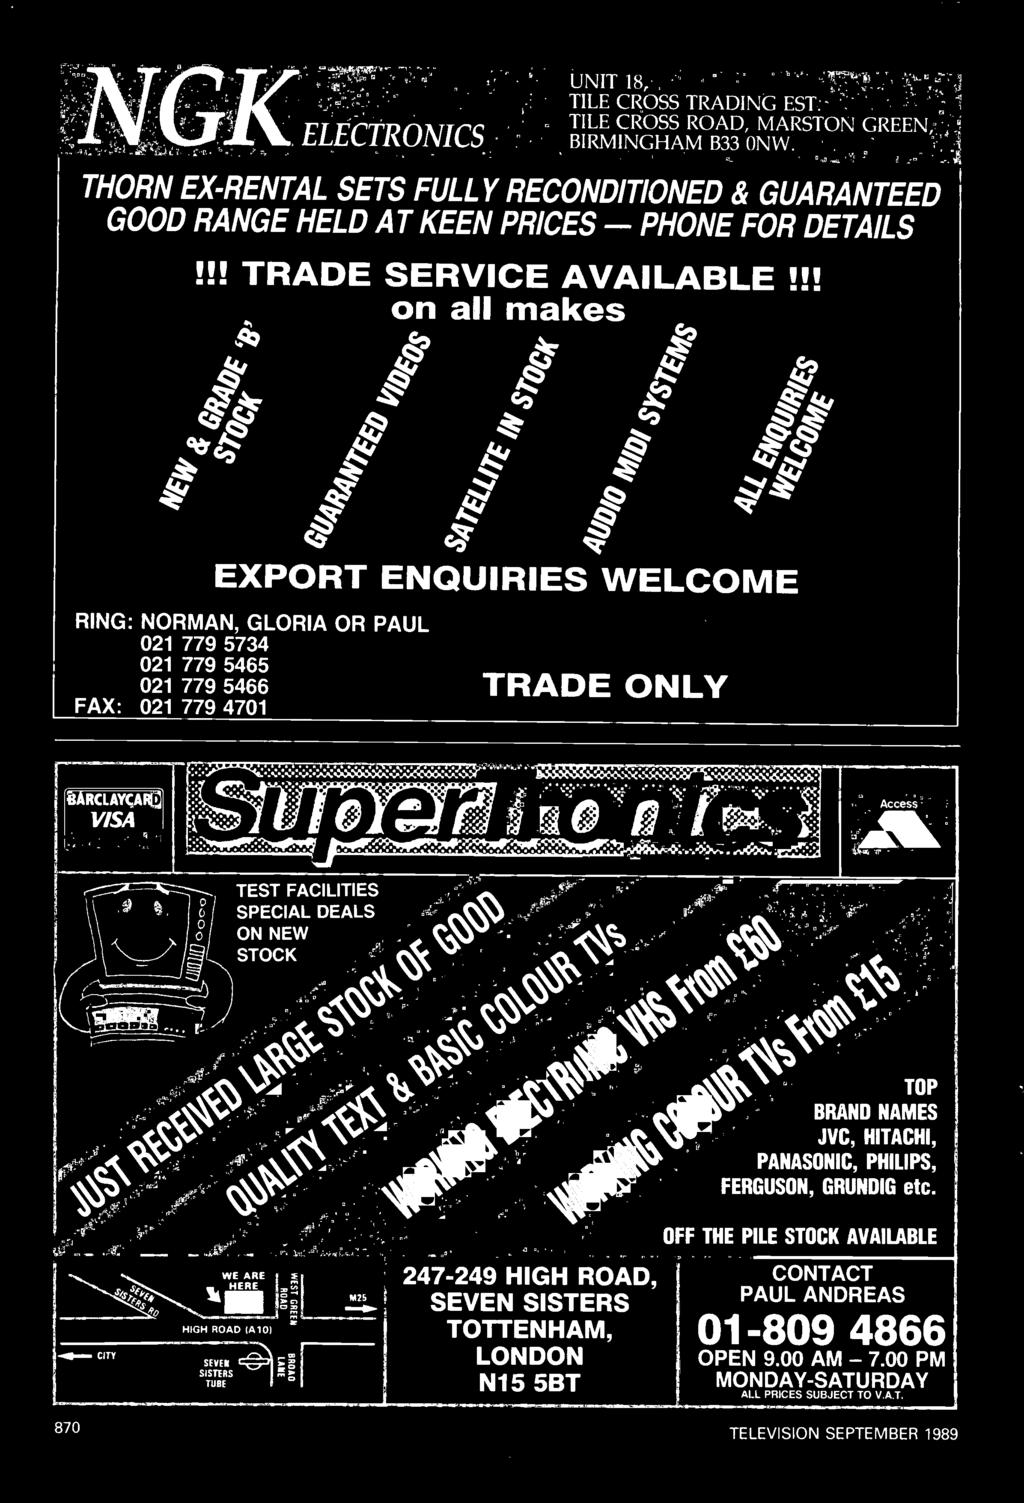 .:144 Q EXPORT ENQUIRIES WELCOME RING: NORMAN, GLORIA OR PAUL 021 779 5734 021 779 5465 021 779 5466 FAX: 021 779 4701 TRADE ONLY Access